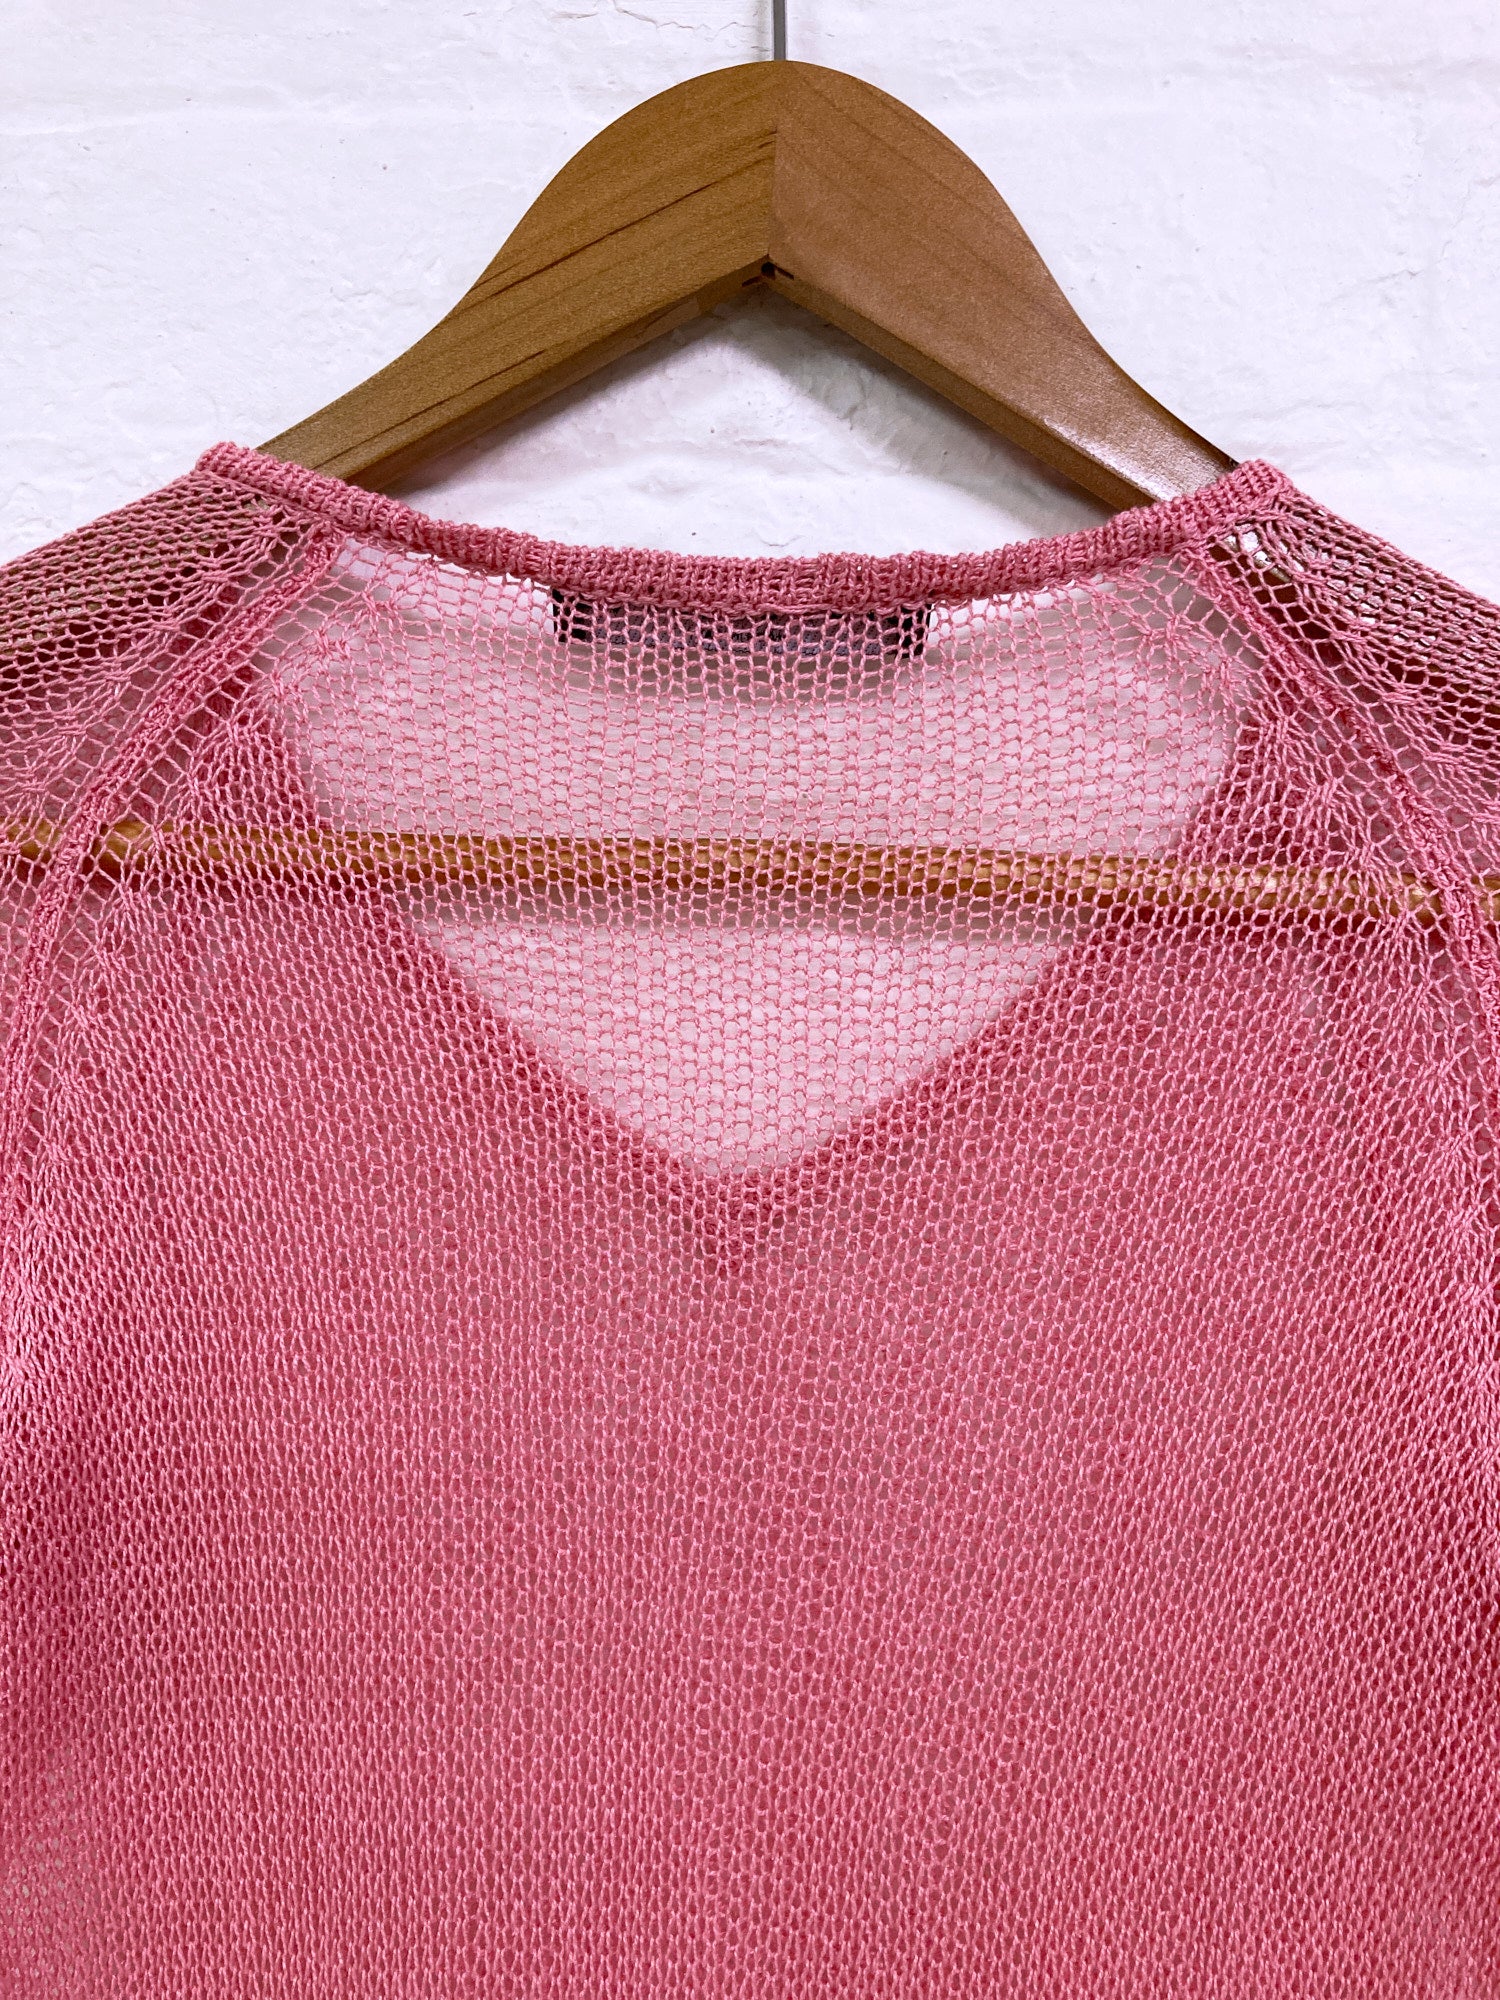 Jean Colonna AW1998 pink silk loose knit long sleeve top - XS